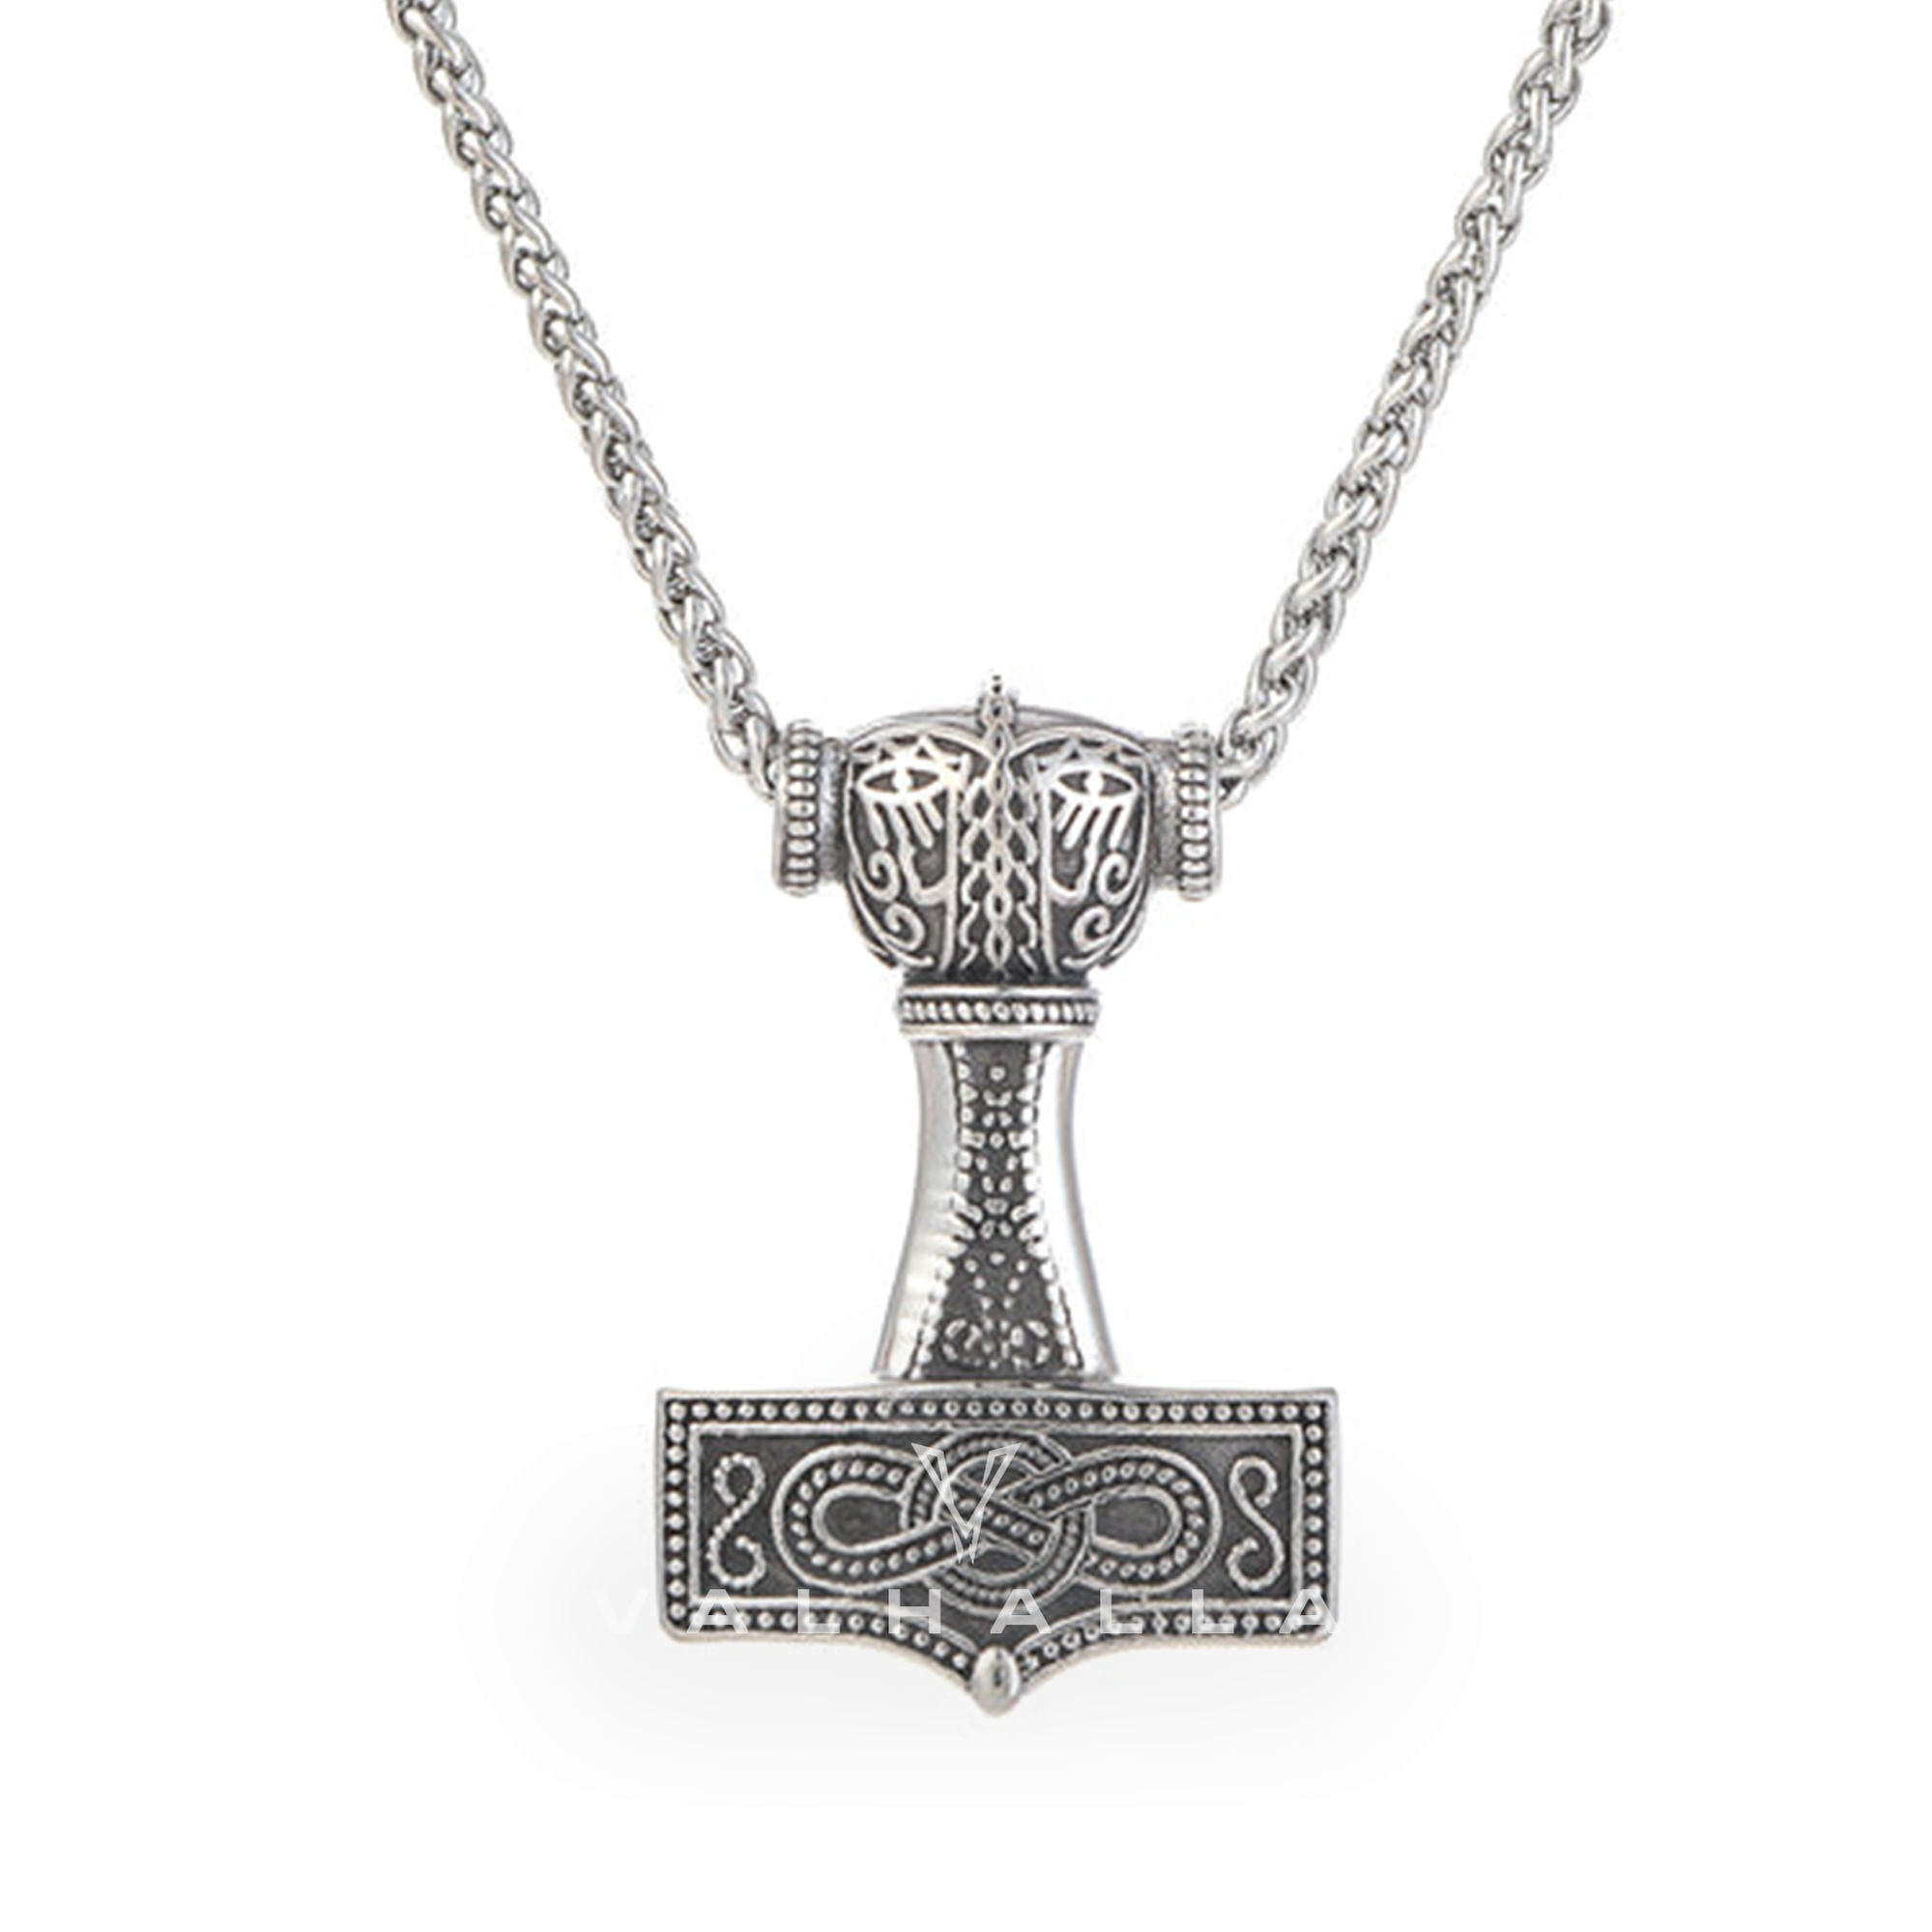 Handcrafted Stainless Steel Chunky Mjolnir Necklace With Celtic Scrolls